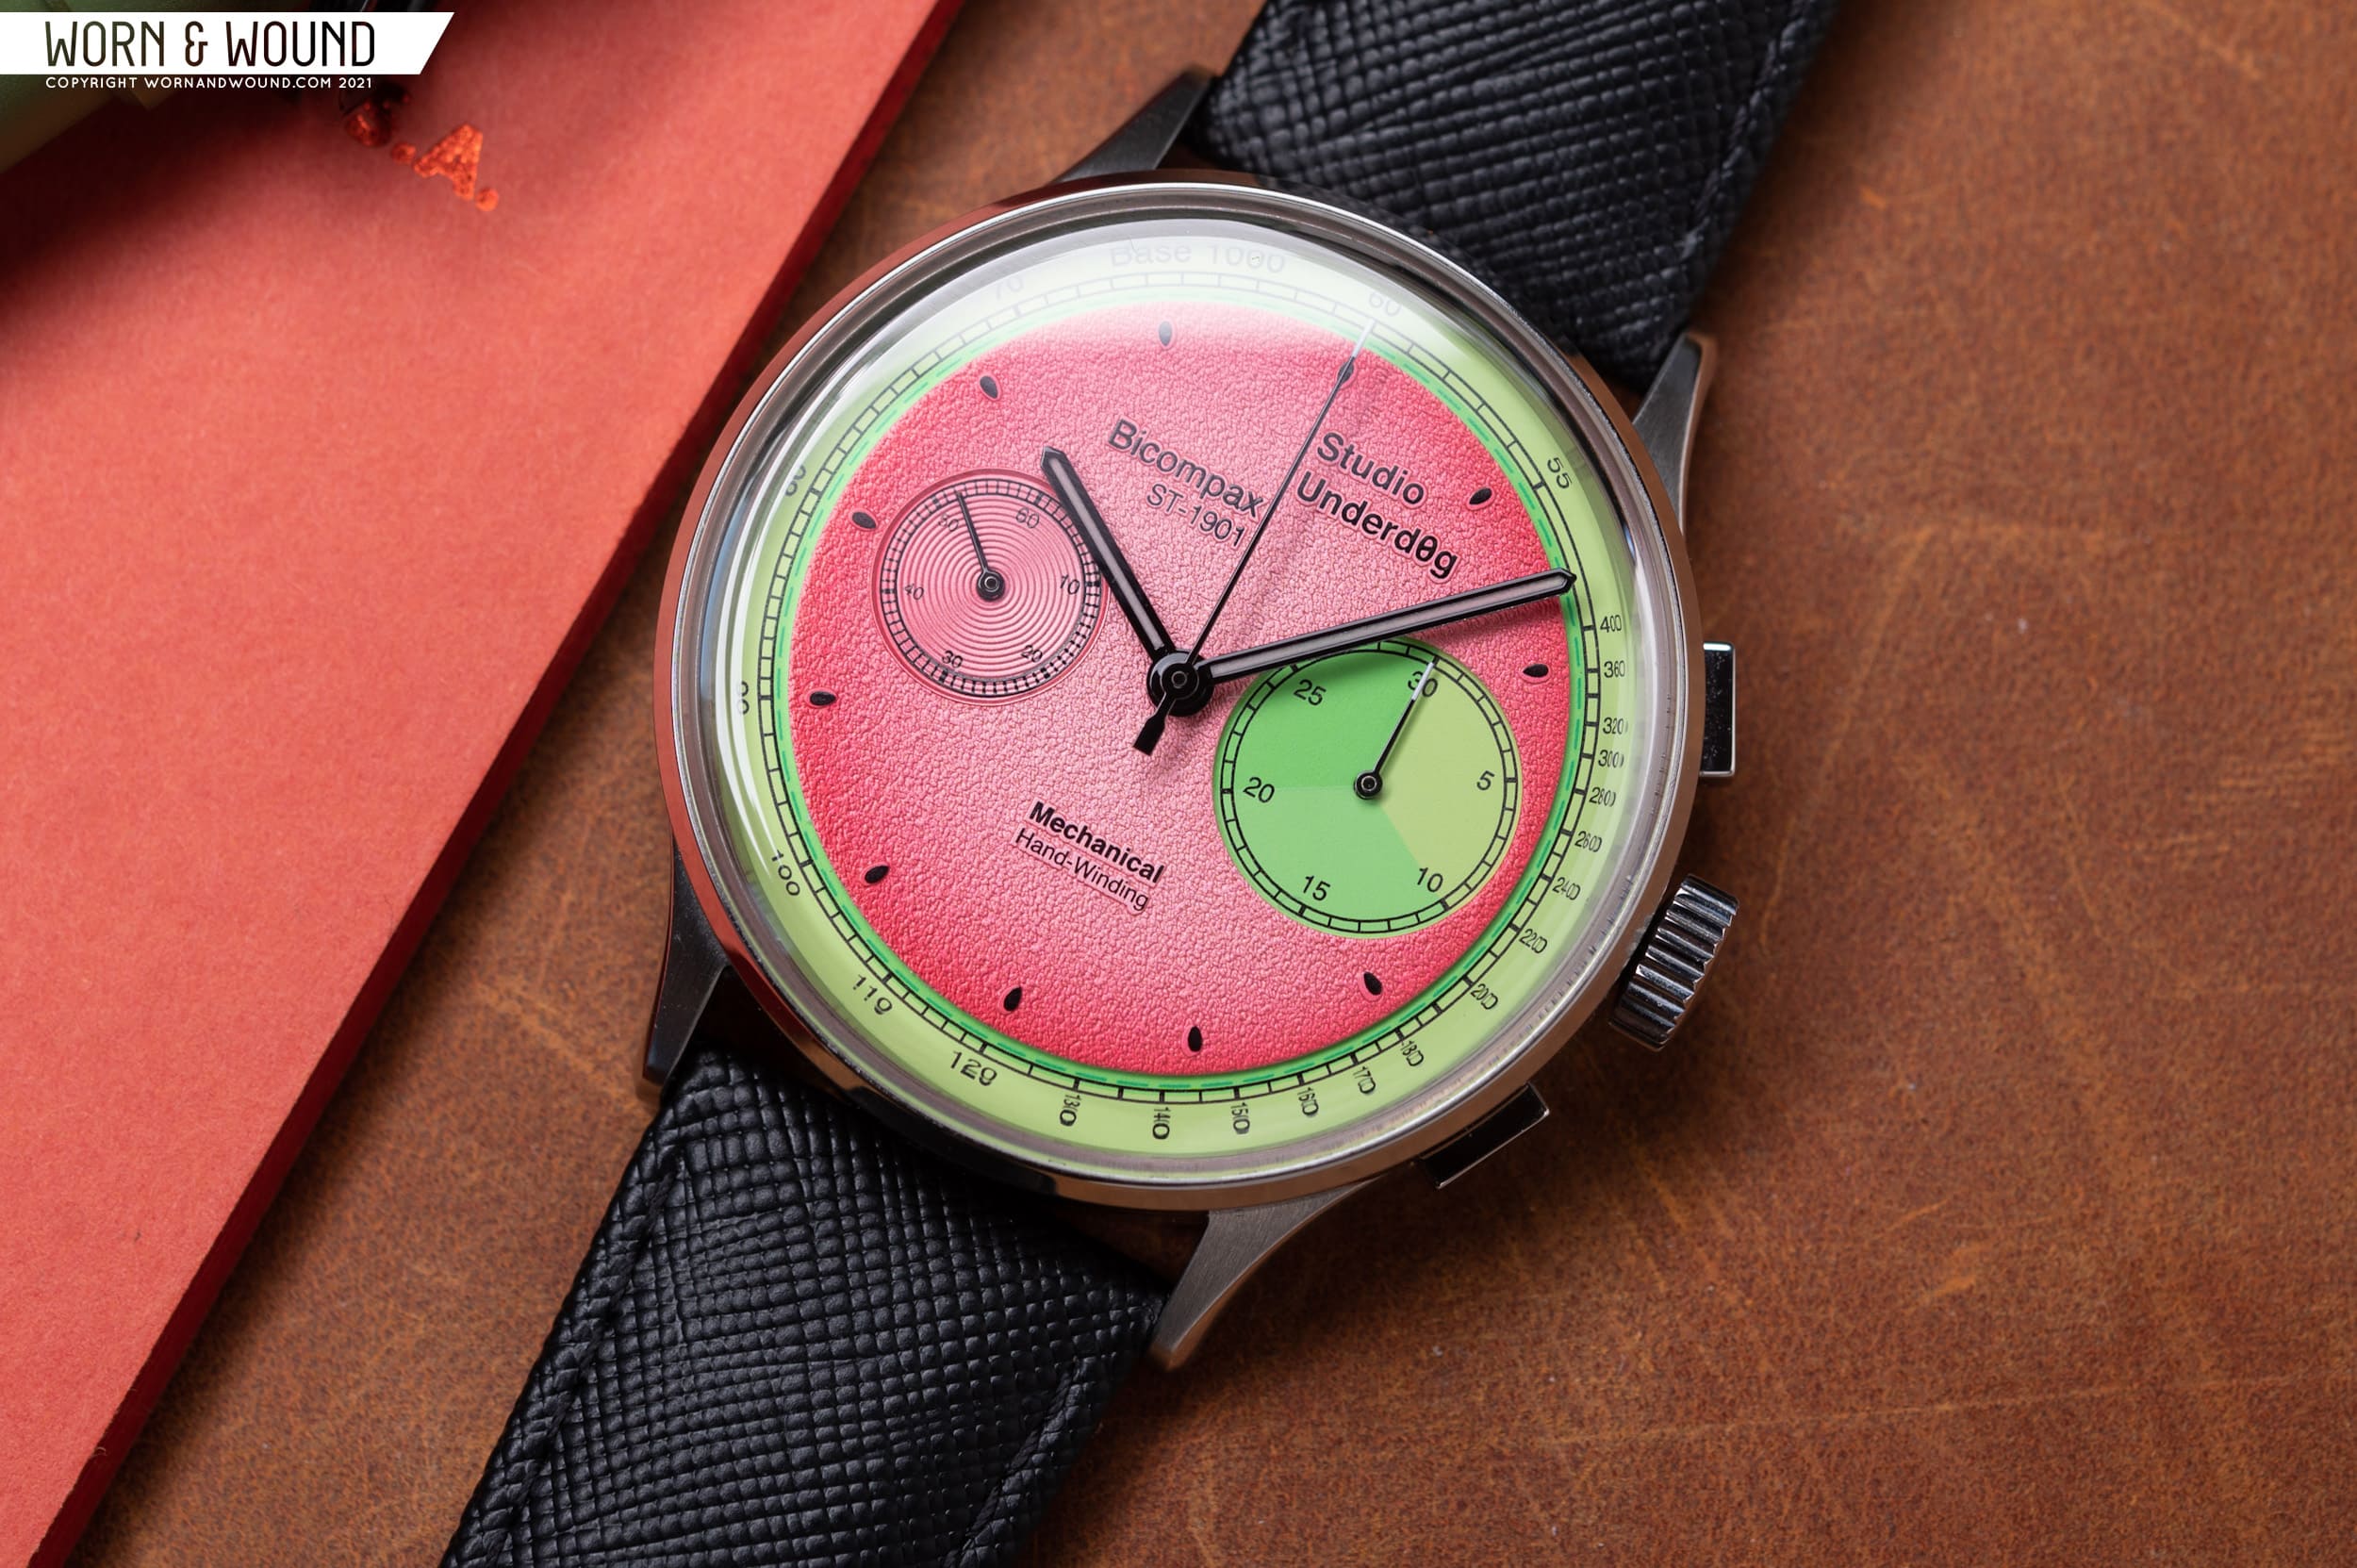 Review: The Colorful Studio Underd0g Chronographs - Worn & Wound